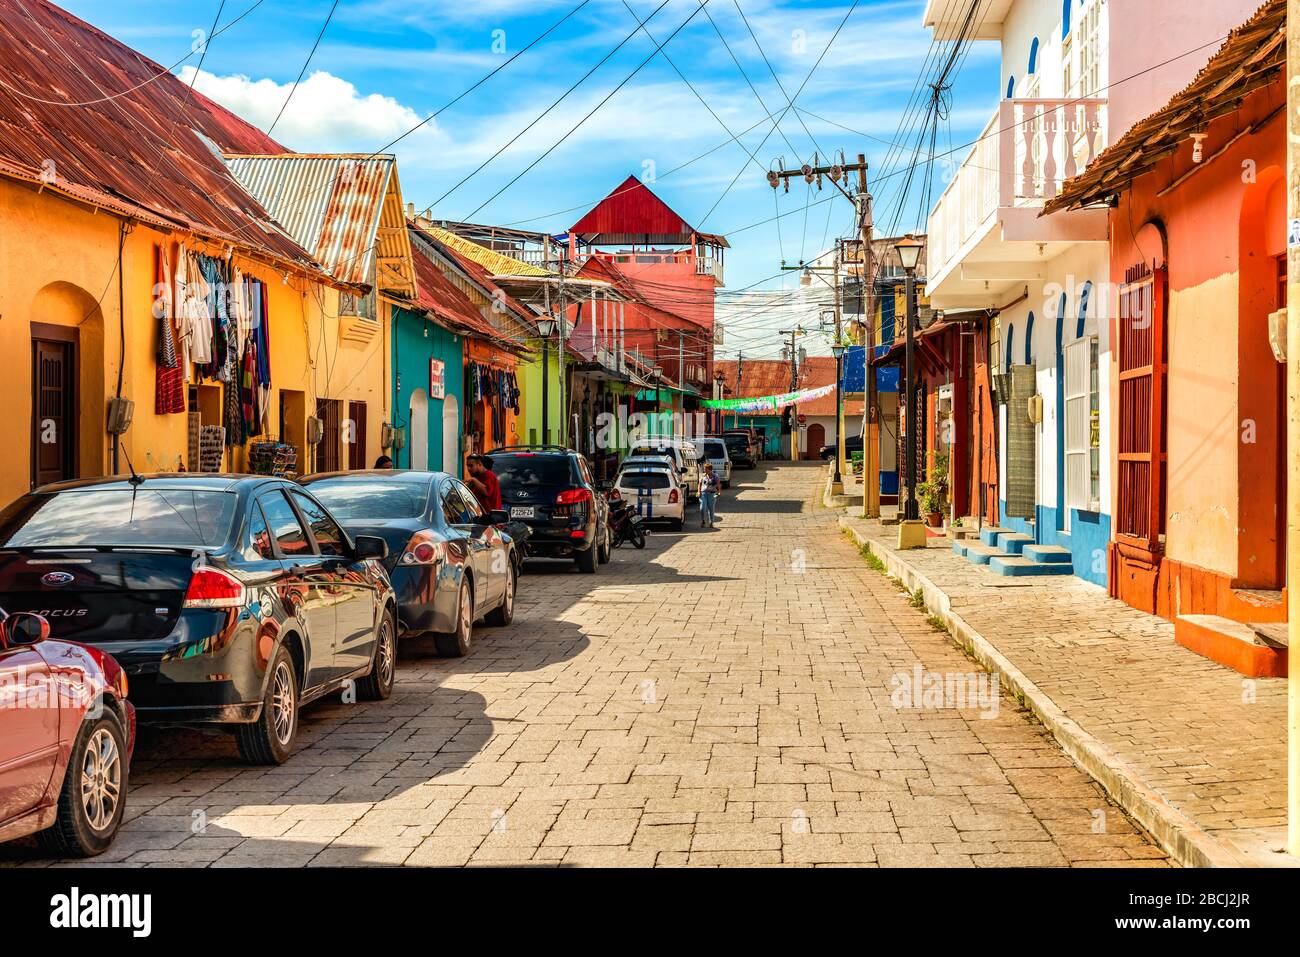 Flores, Guatemala - December 15, 2016:  View at the street and houses located in historic district of the town of Flores in Guatemala. Stock Photo